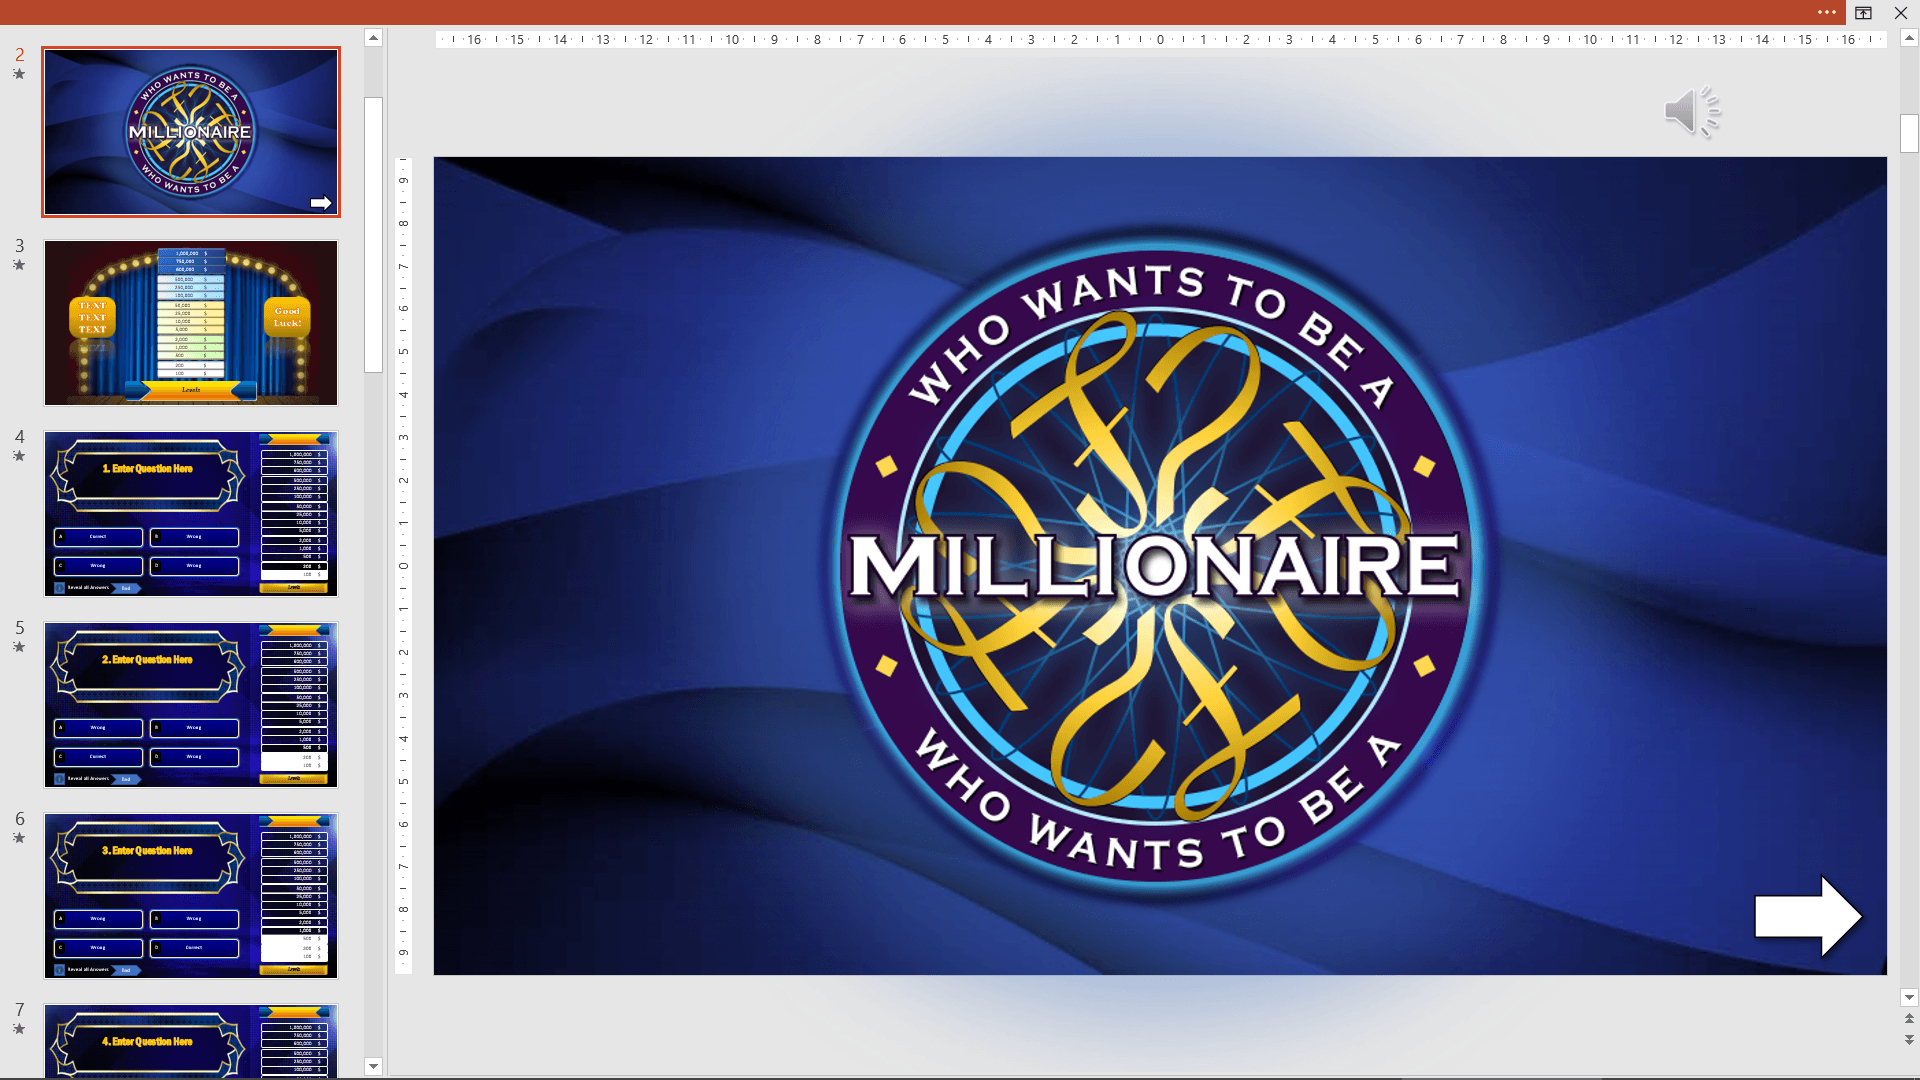 Who Wants To Be A Millionaire? – Powerpoint Vba Game Within Who Wants To Be A Millionaire Powerpoint Template